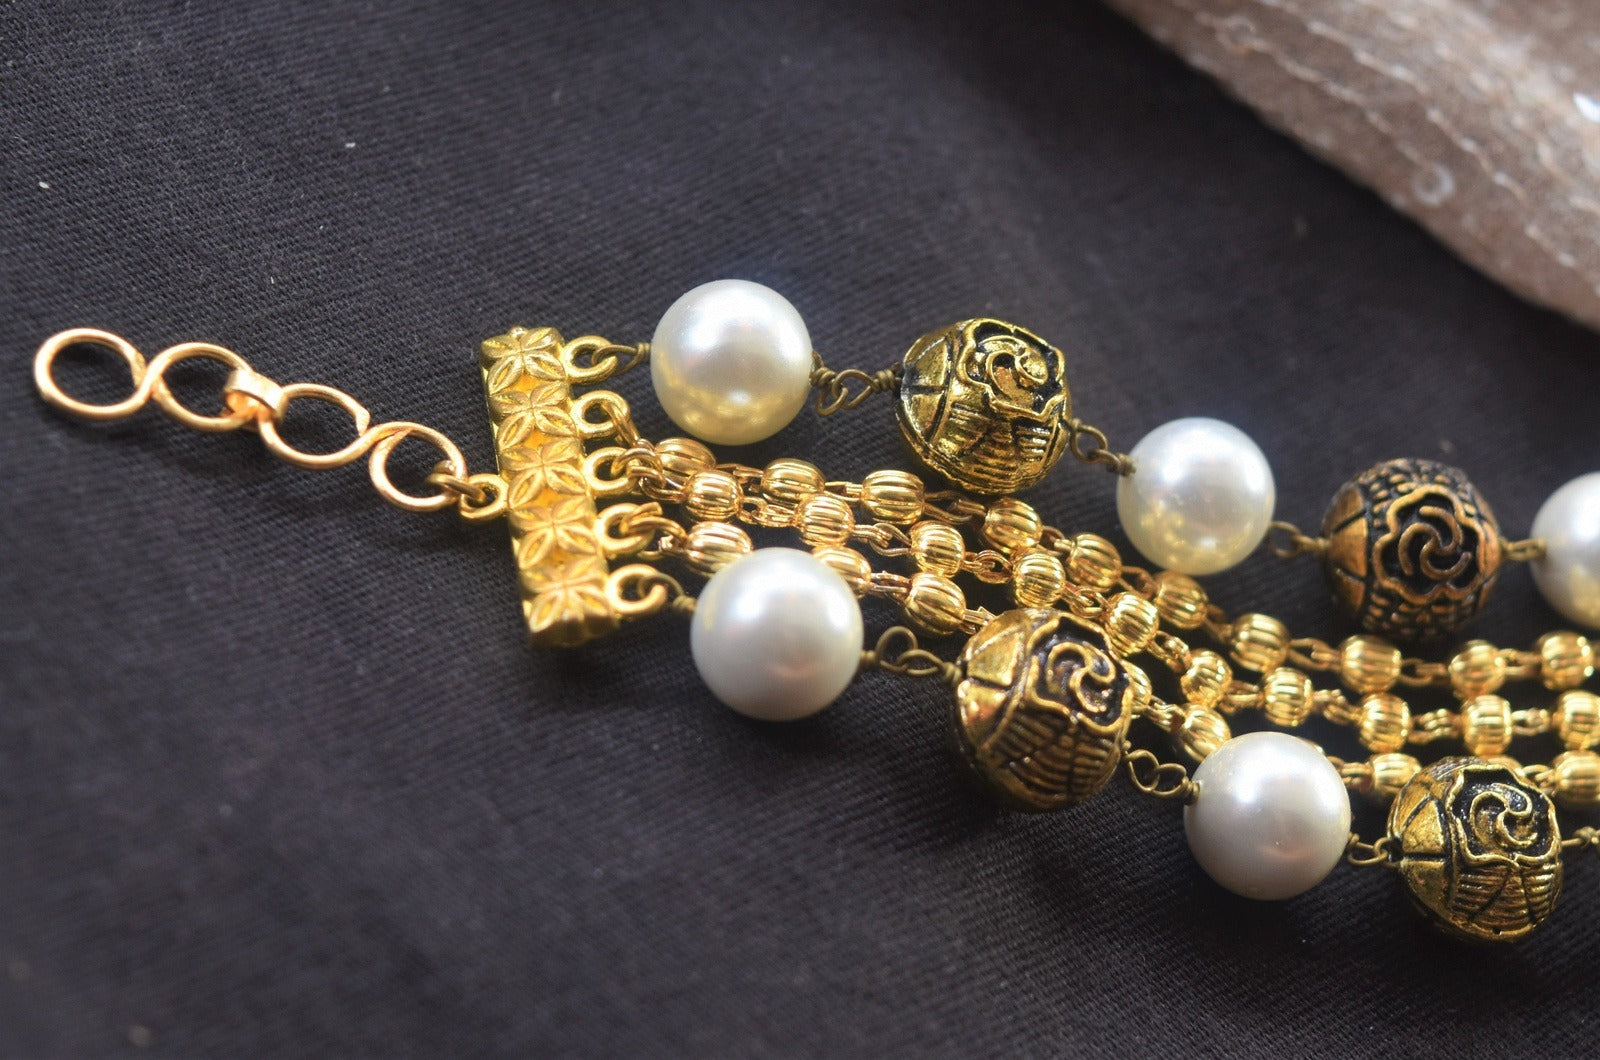 White Bracelet Suvarna at Kamakhyaa by House Of Heer. This item is Add Ons, Alloy Metal, Beaded Jewellery, Bracelets, Festive Jewellery, Festive Wear, Free Size, jewelry, July Sale, July Sale 2023, Less than $50, Natural, Pearl, Textured, White